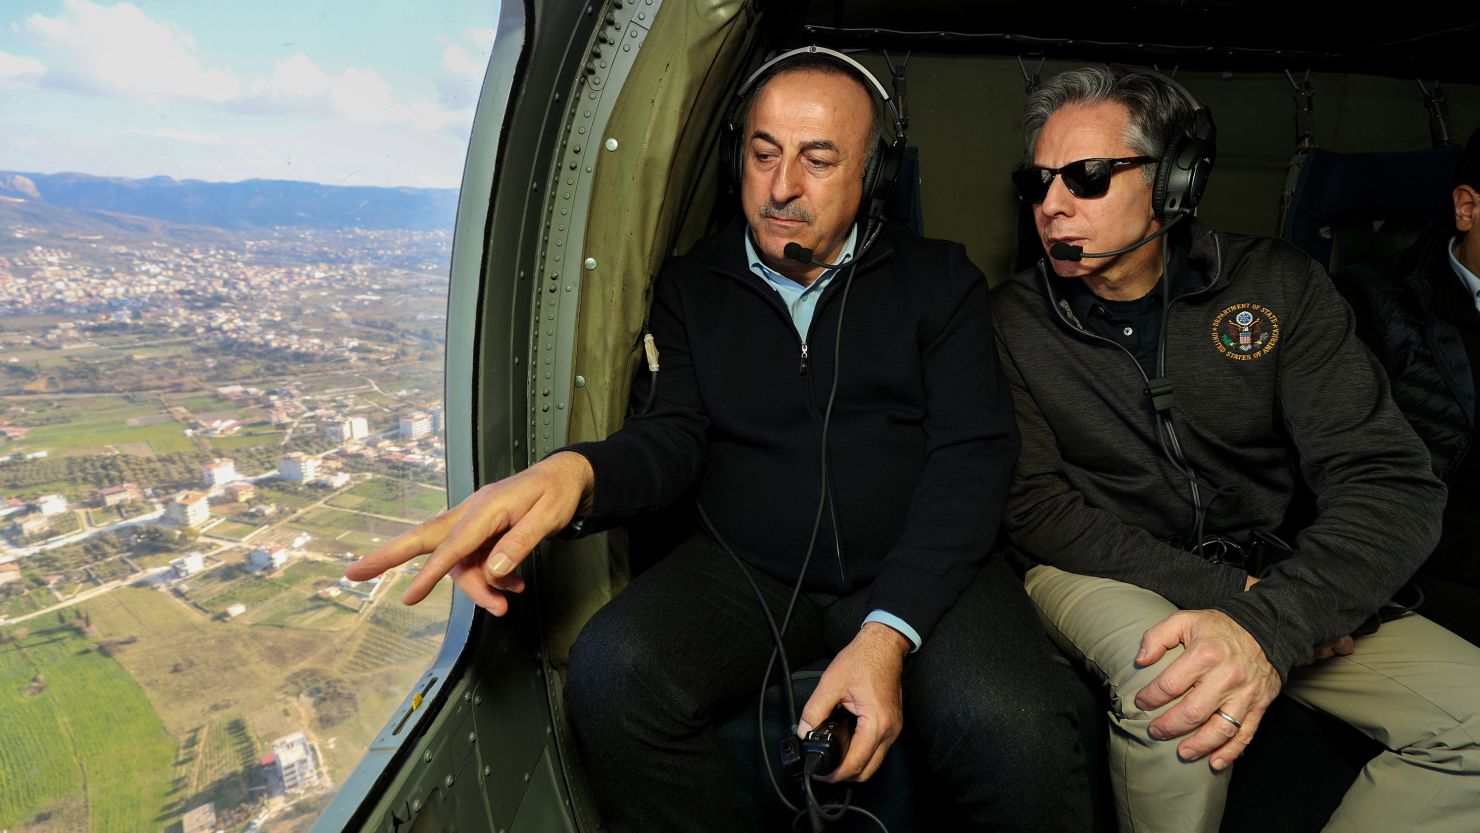 Turkish foreign minister Mevlüt Çavuşoğlu, left, and US Secretary of State Antony Blinken depart in a helicopter from Incirlik Air Base on February 19, 2023, to inspect earthquake damage.